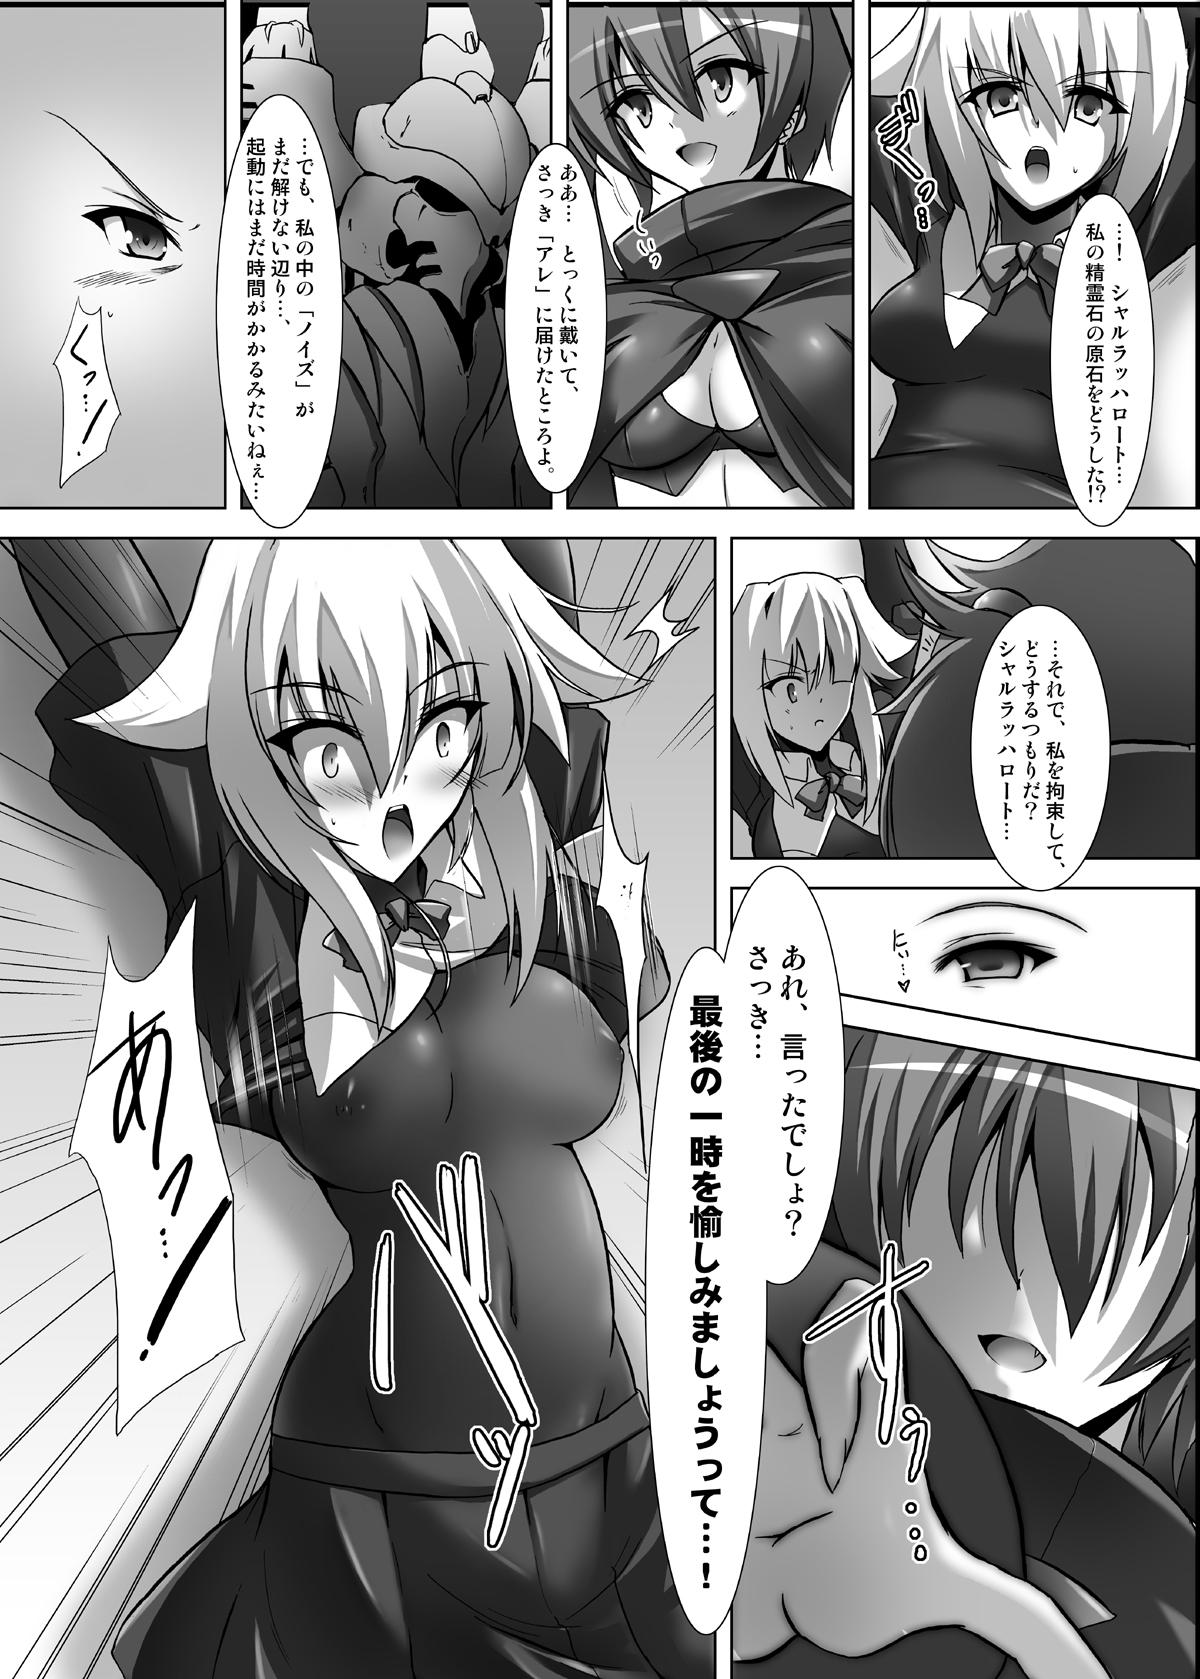 Pussysex WOUNDED VALKYRJUR - Arcana heart Outdoors - Page 11